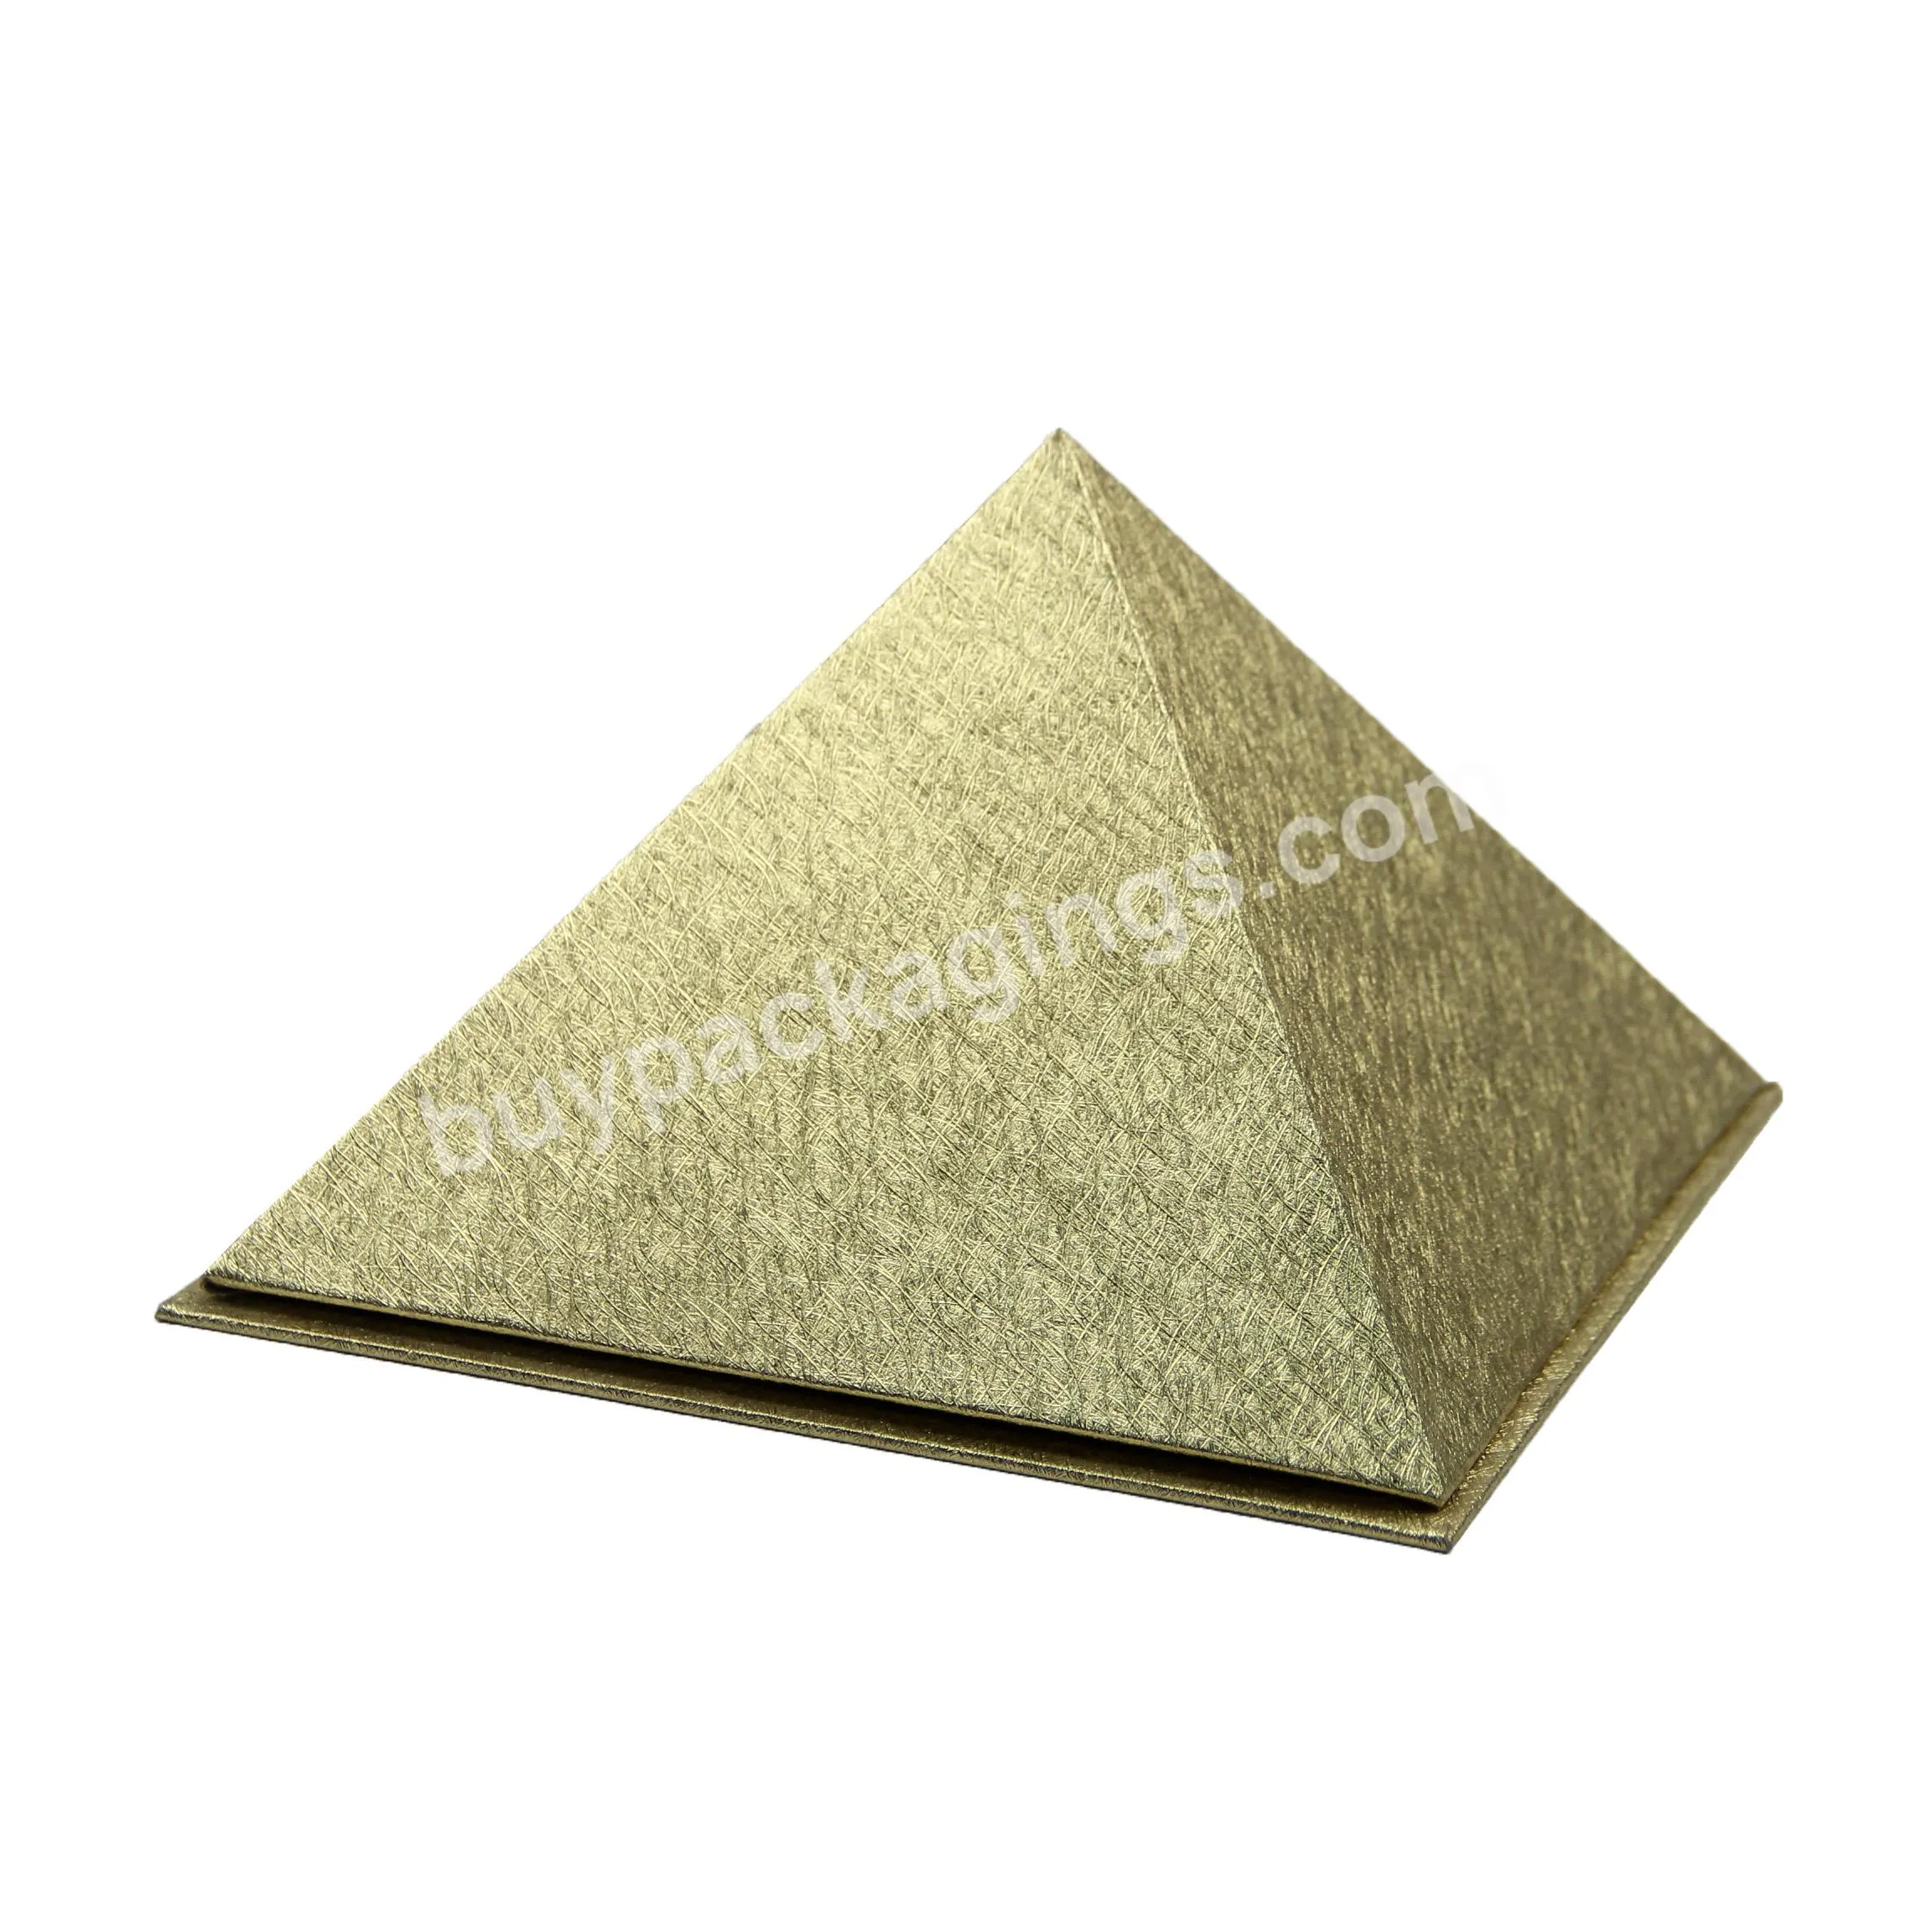 Creative glitter gold color paper triangle shape candle gift box